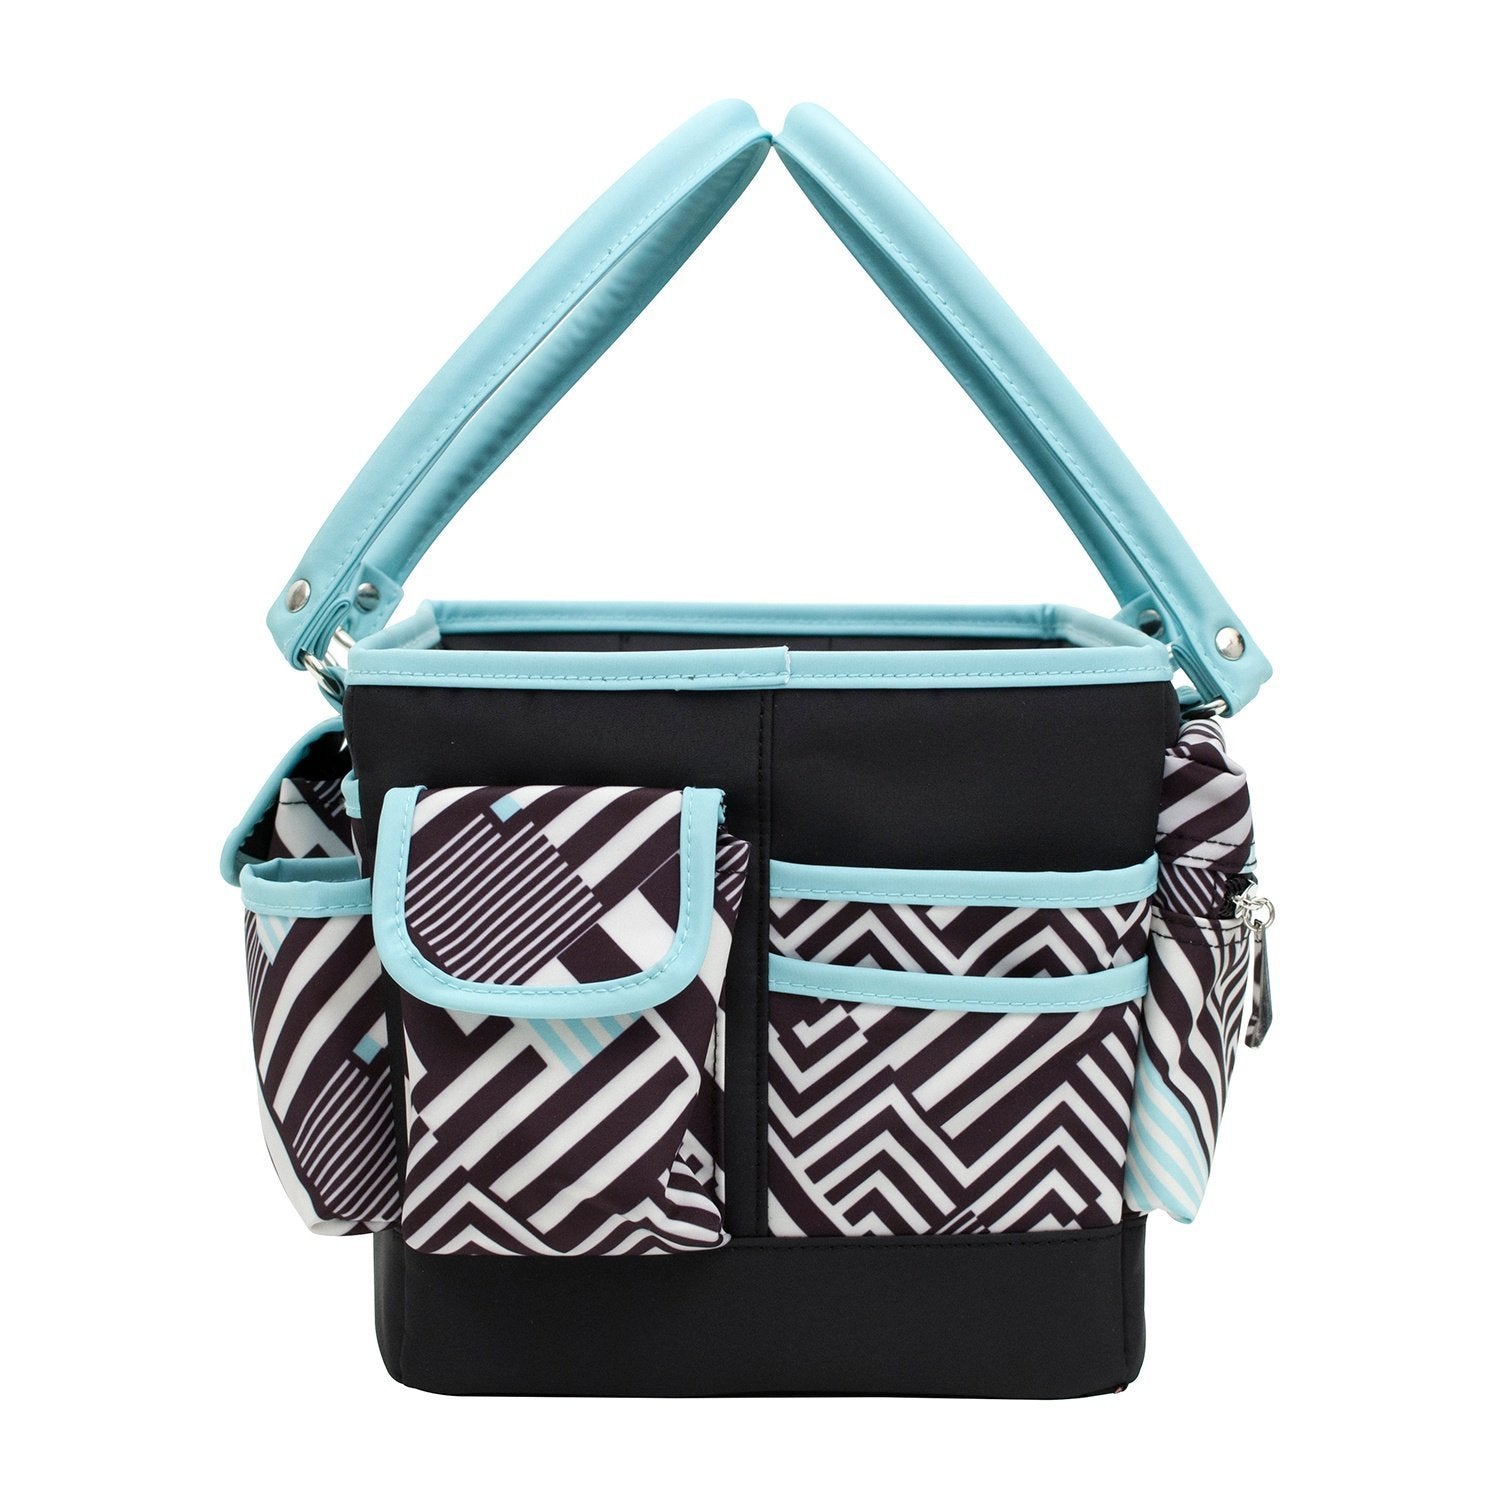 Deluxe Store & Tote Craft Organizer, Teal Geometric - Everything Mary